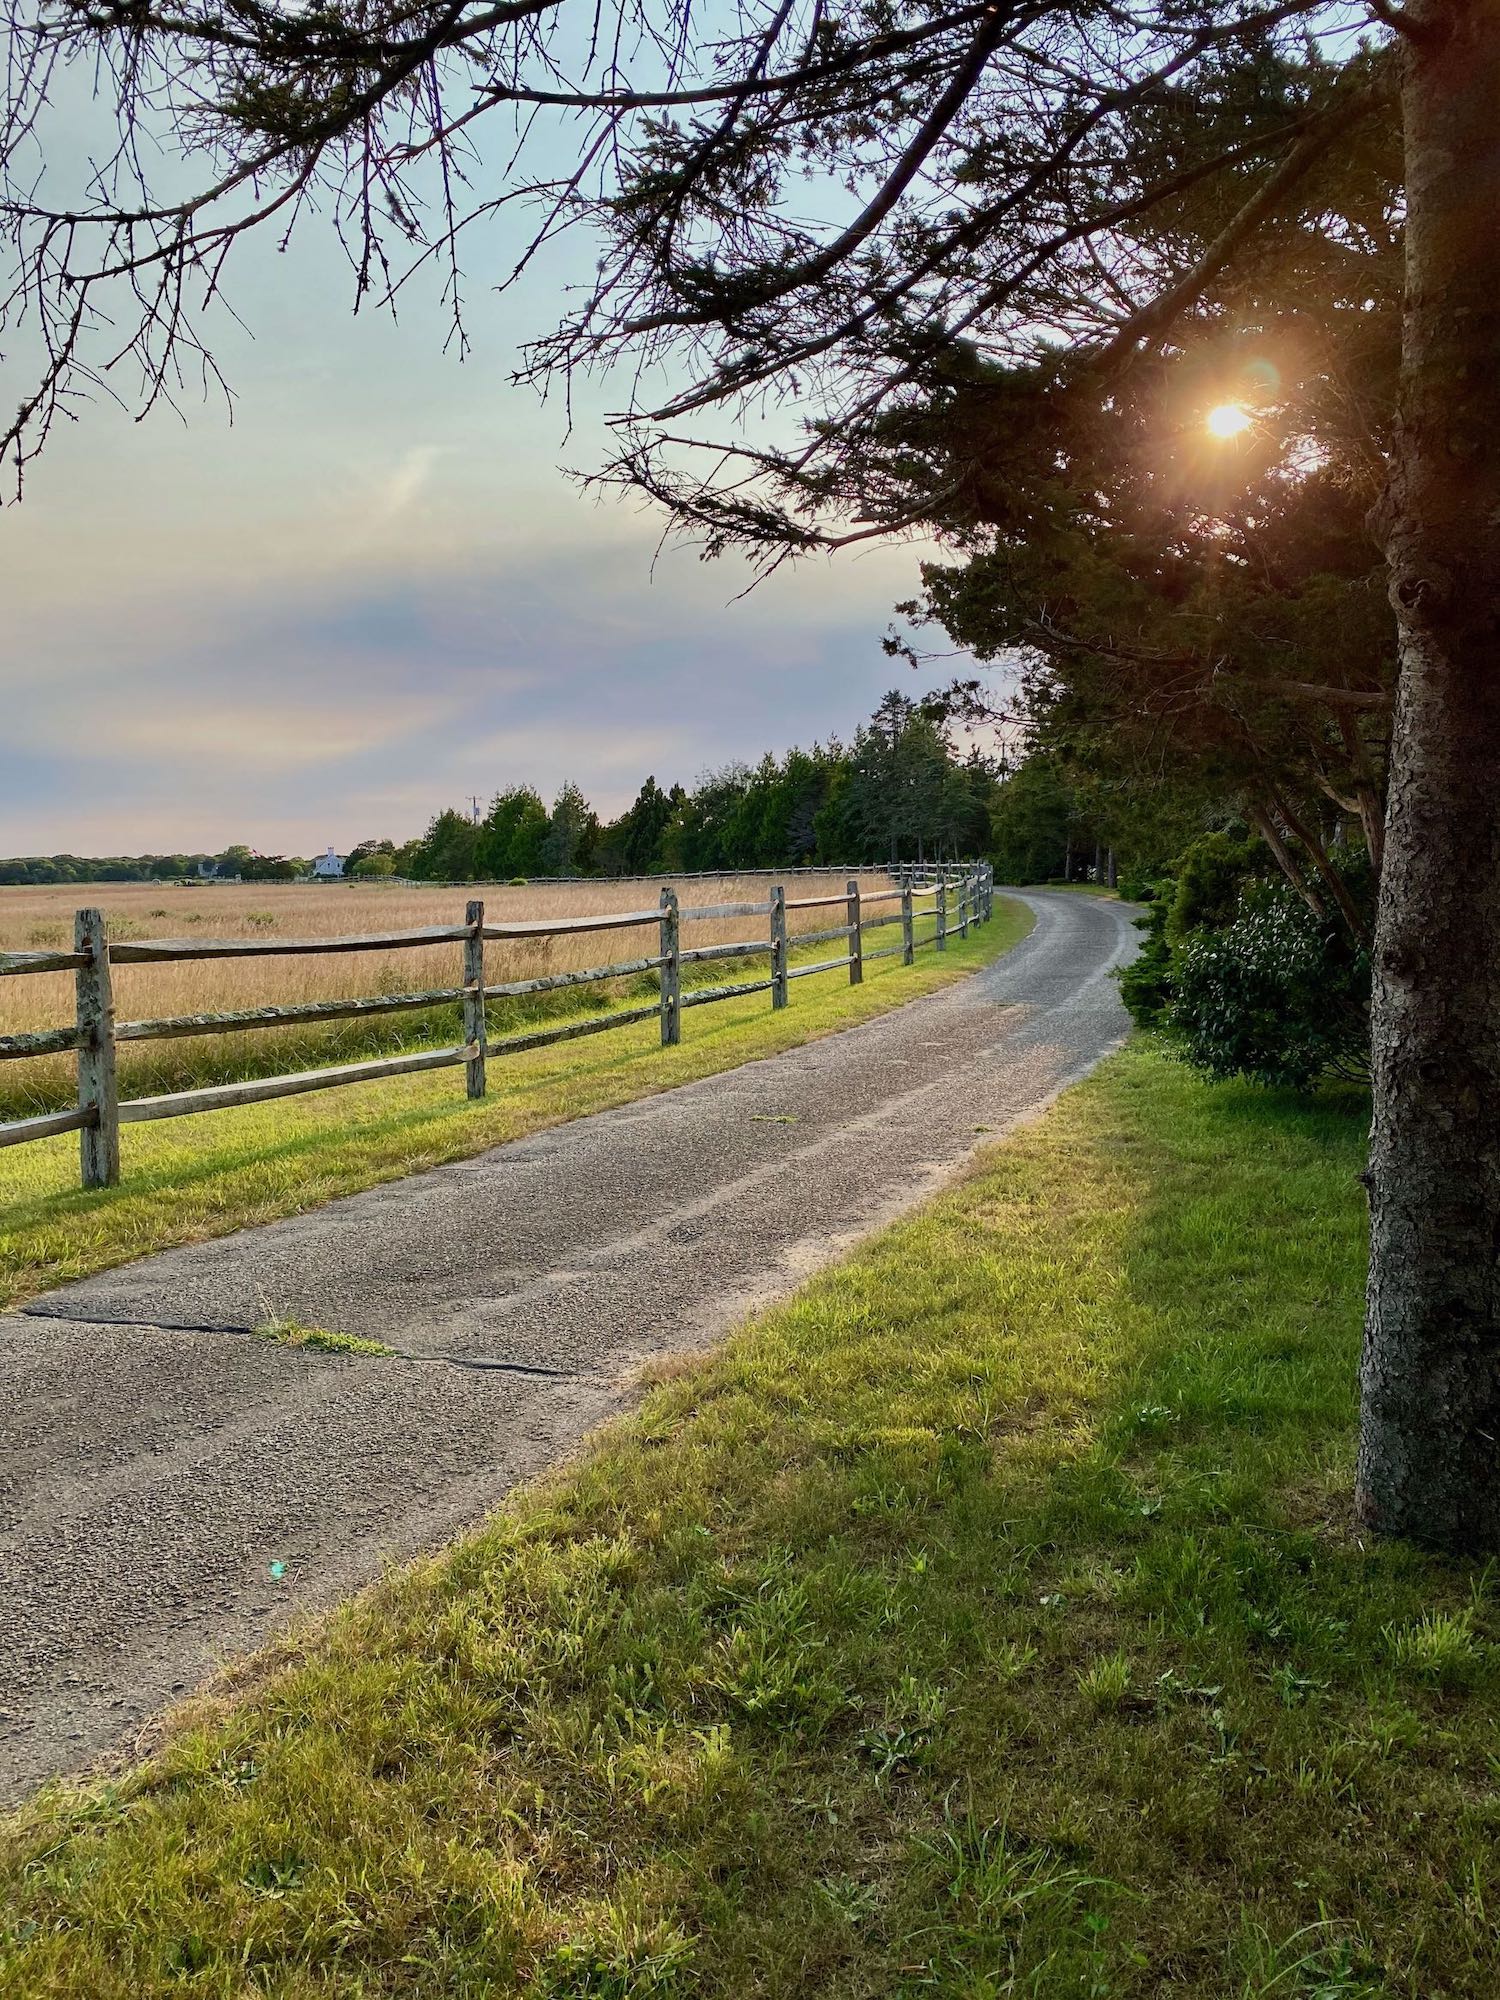 A Split Rail Fence and Golden Grass at Sunset